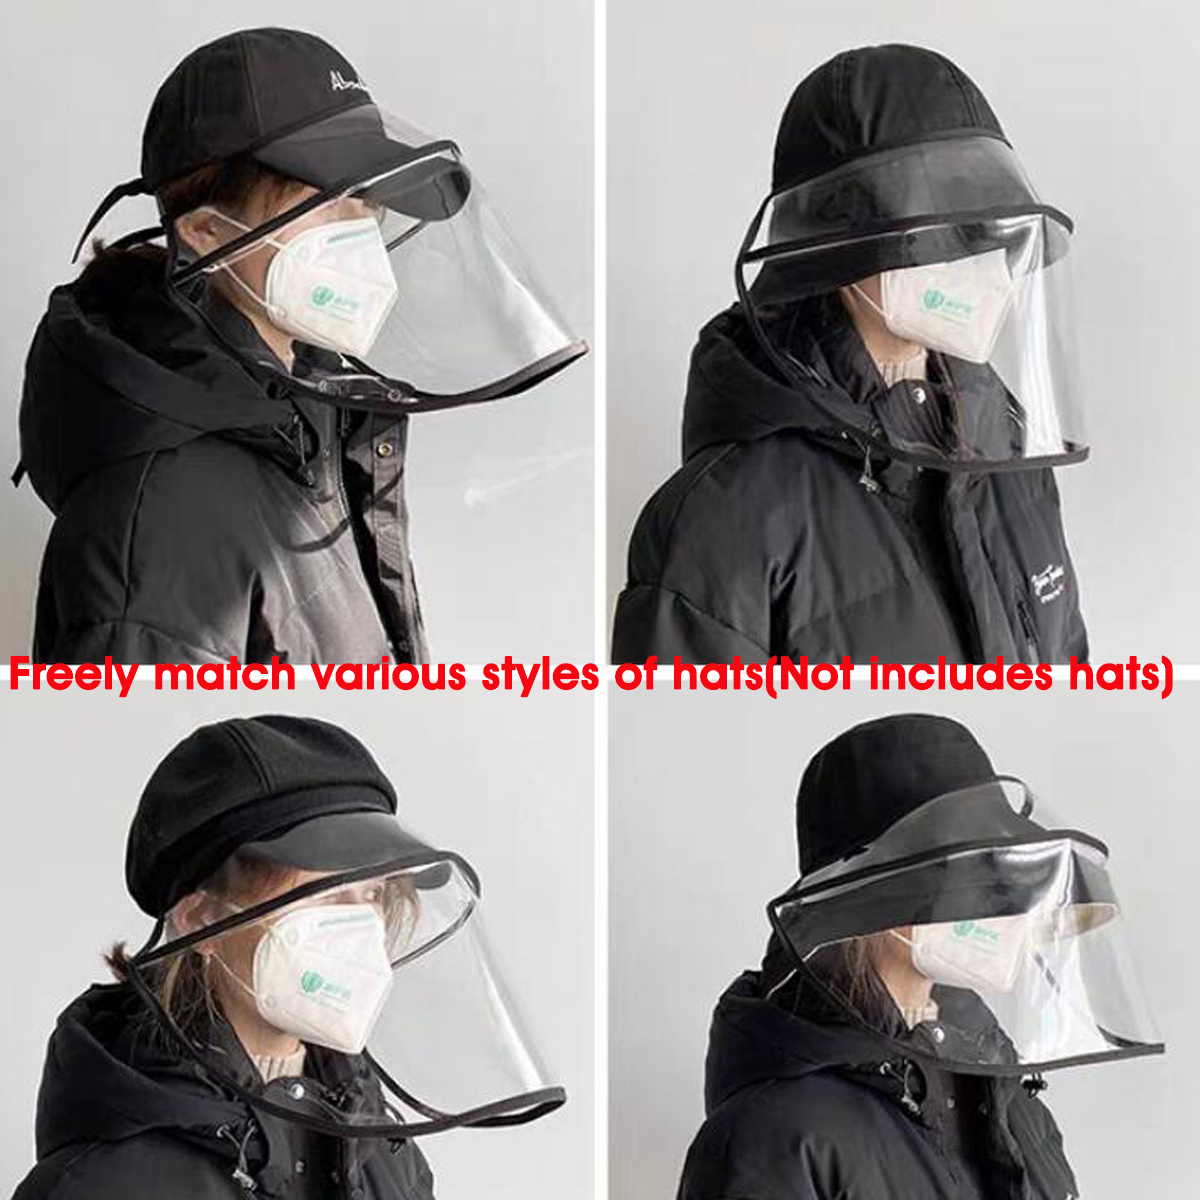 PVC-Transparent-Breathable-Splash-proof-Dustproof-Full-Face-Mask-Disassembleable-For-All-Hats-Fishma-1660688-3